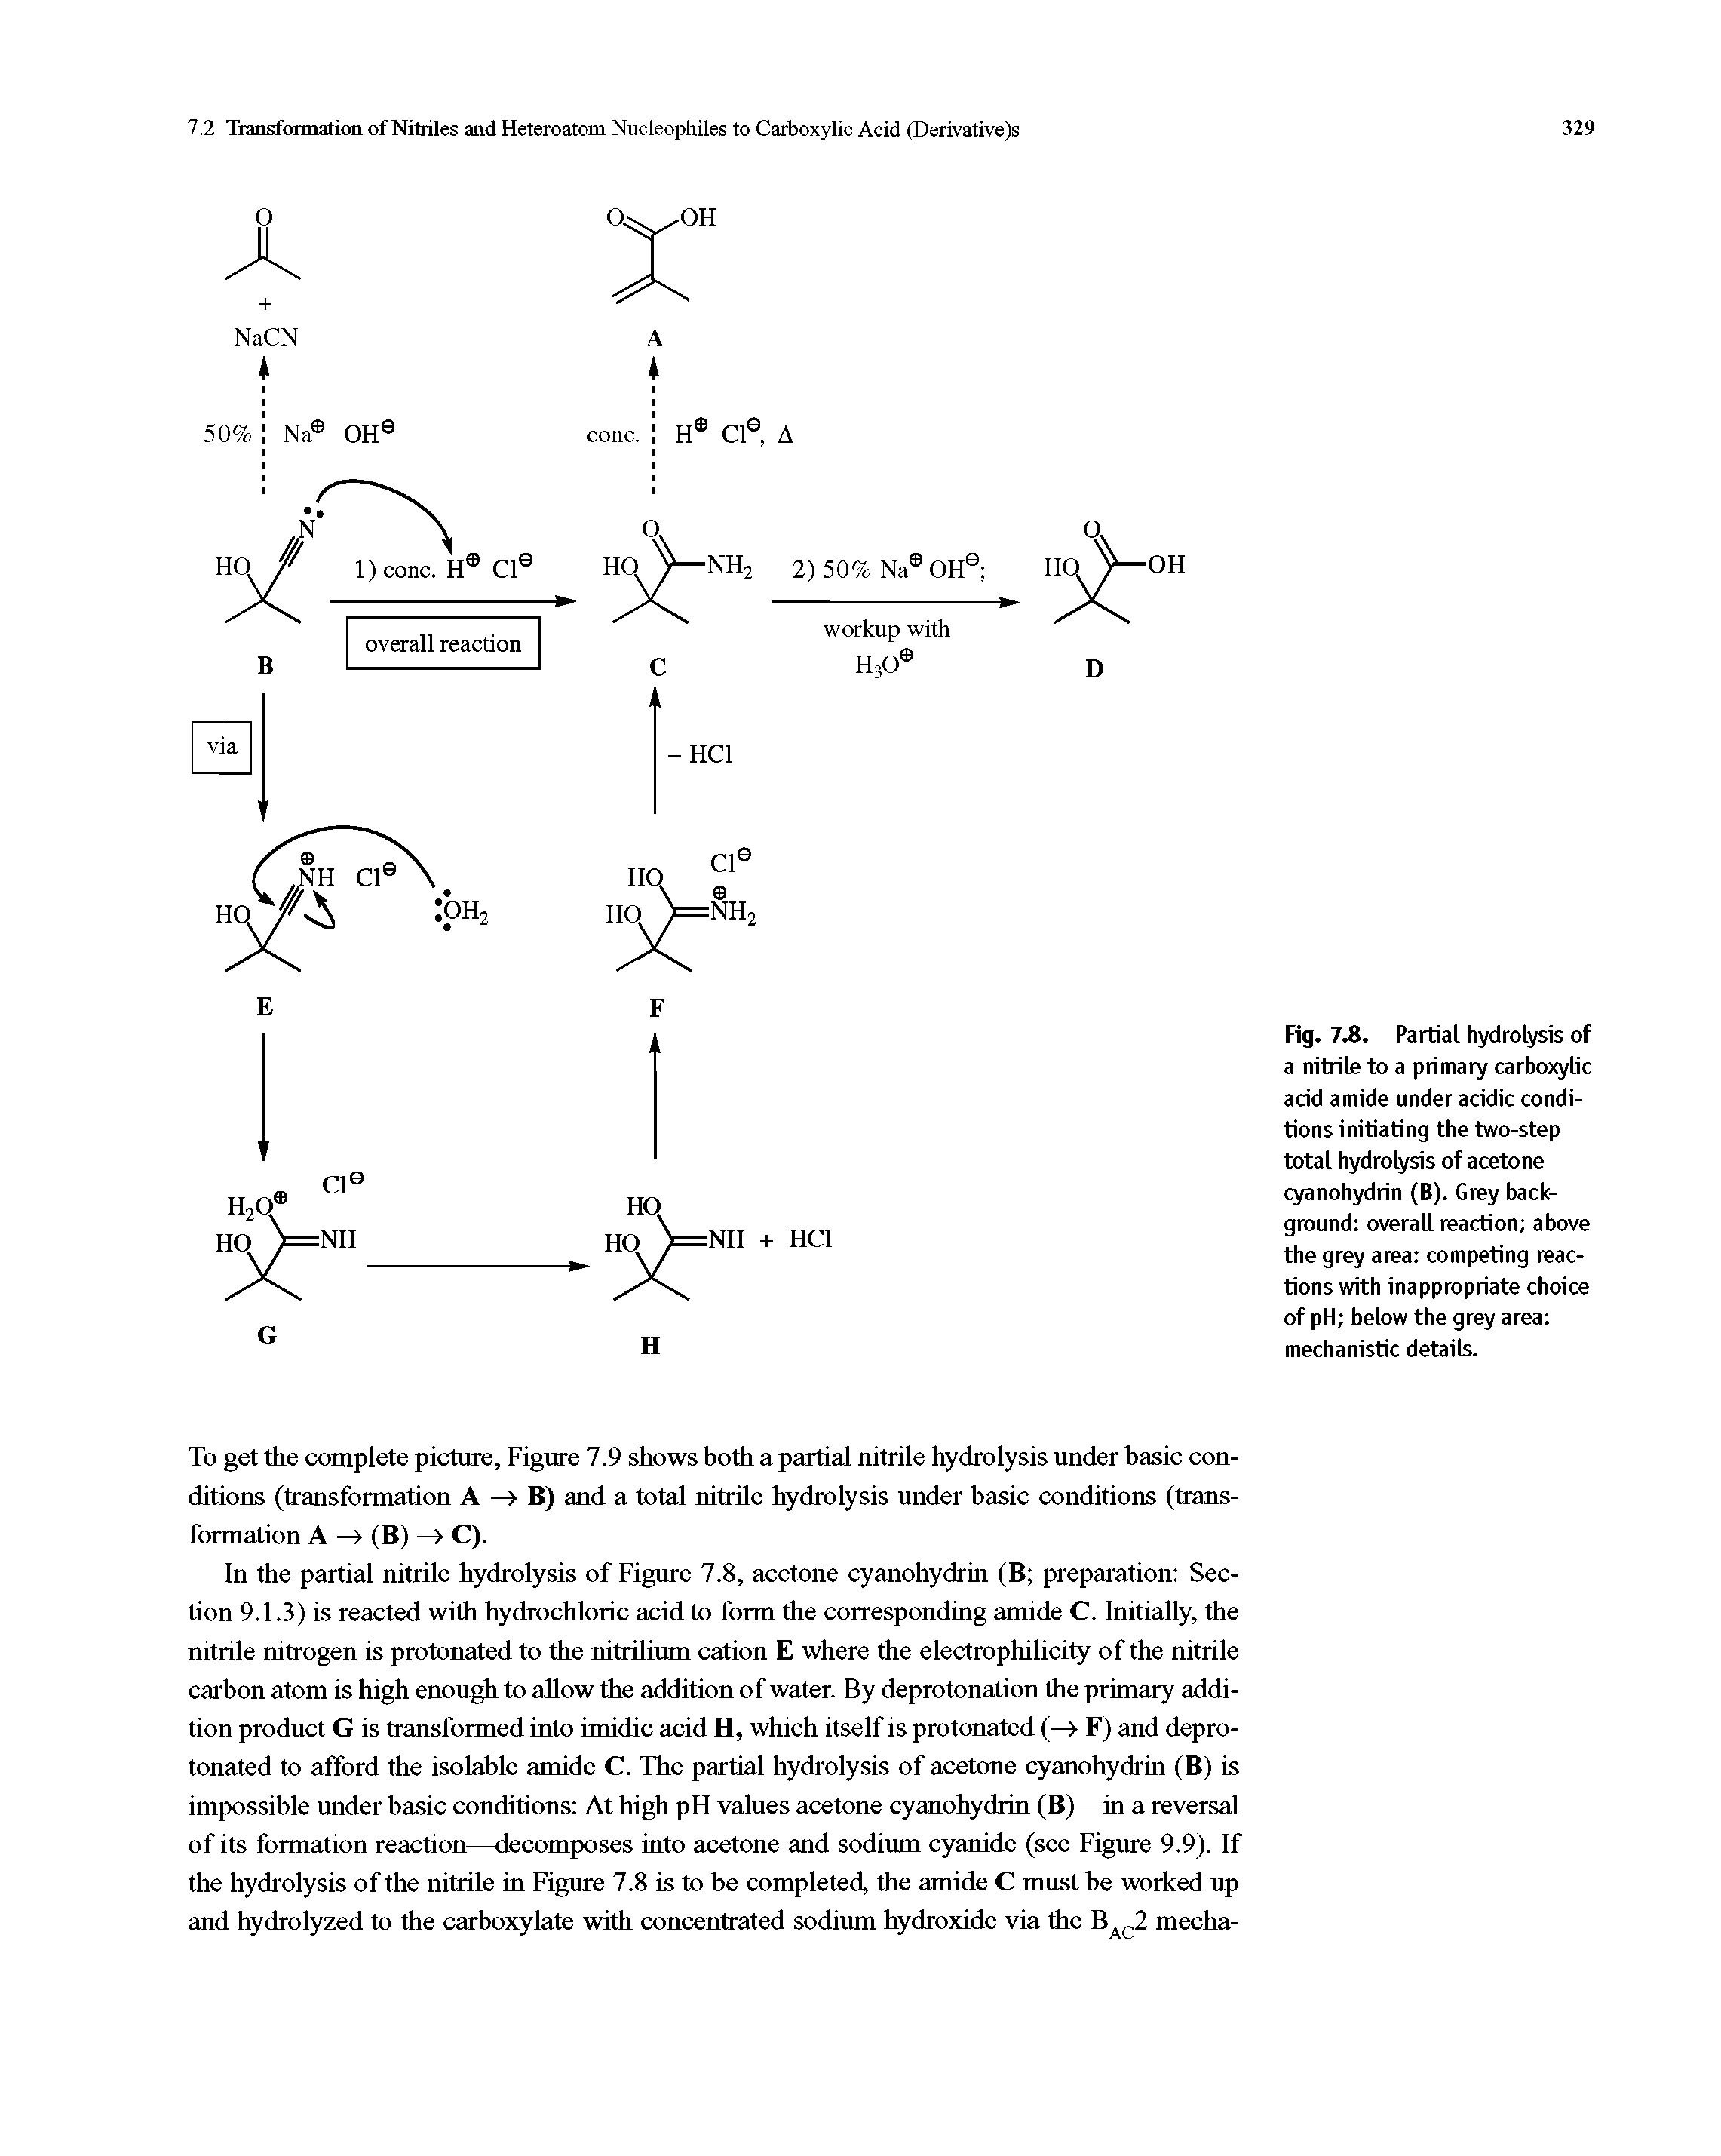 Fig. 7.8. Partial hydrolysis of a nitrile to a primary carboxylic acid amide under acidic conditions initiating the two-step total hydrolysis of acetone cyanohydrin (B). Grey background overall reaction above the grey area competing reactions with inappropriate choice of pH below the grey area mechanistic details.